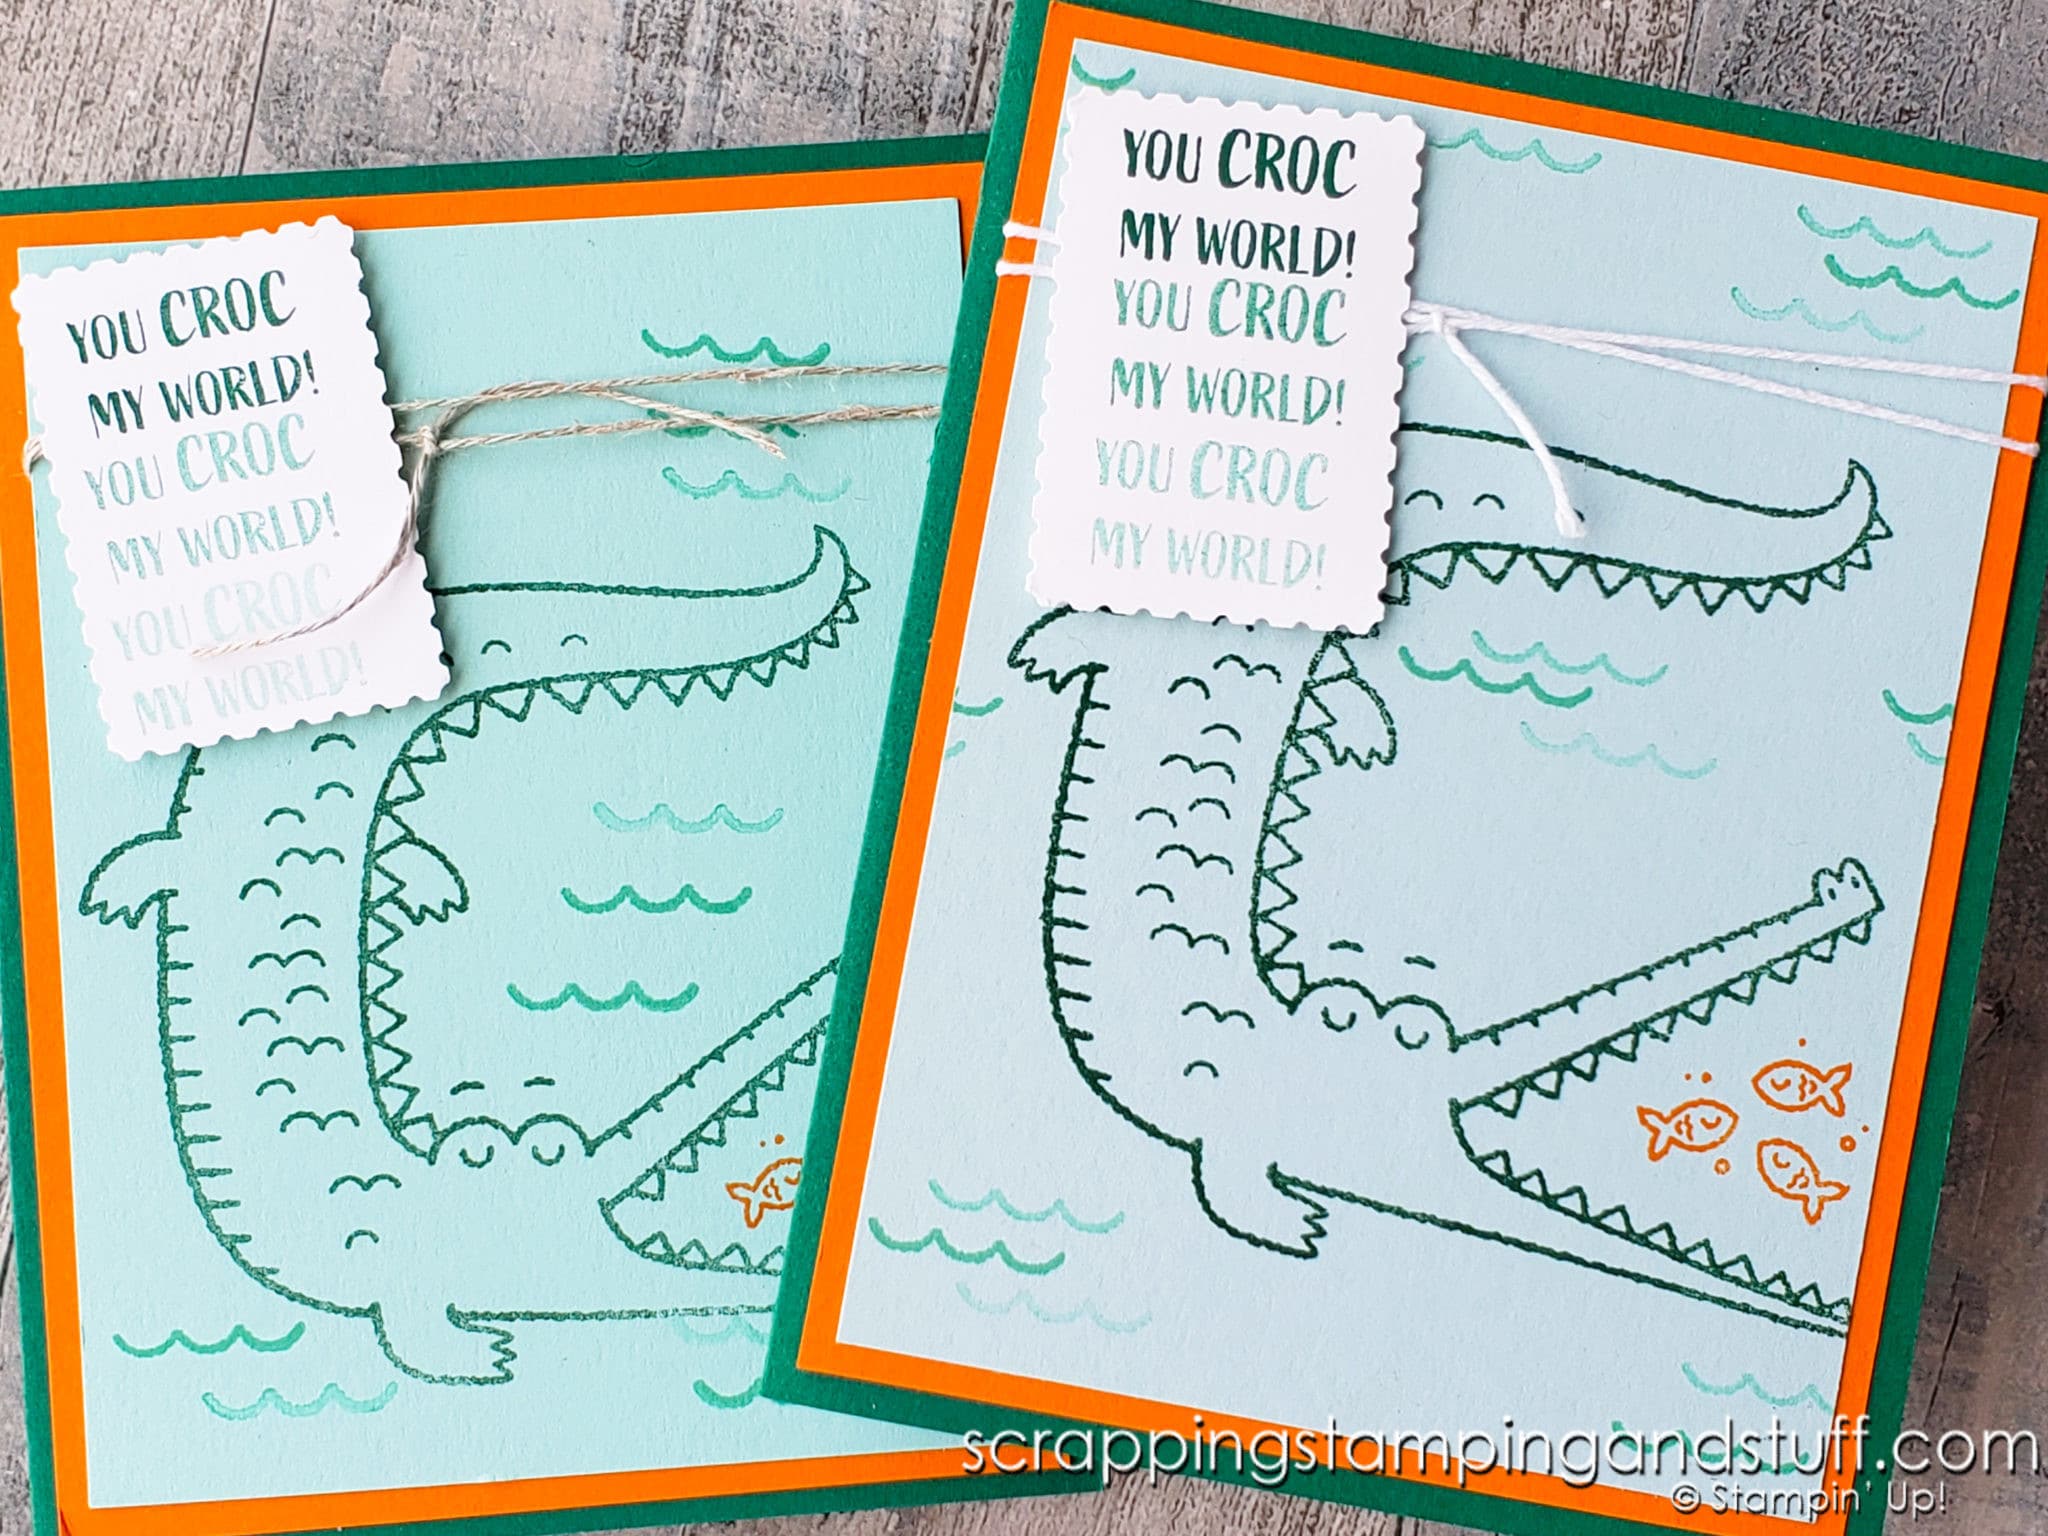 Stampin Up Oh Snap – You Croc My World Card!